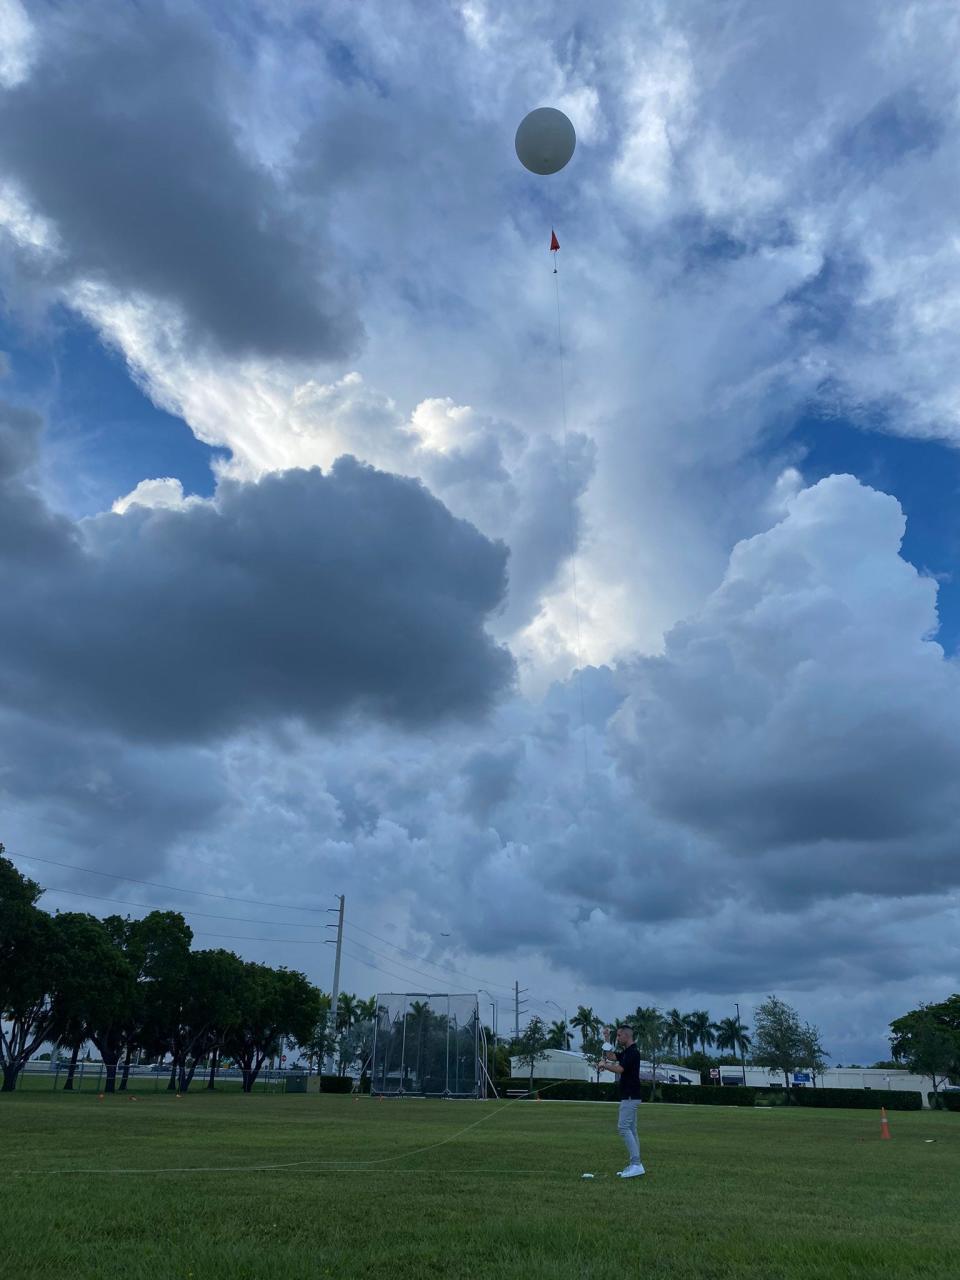 A launch of a weather balloon from the National Weather Service Miami.